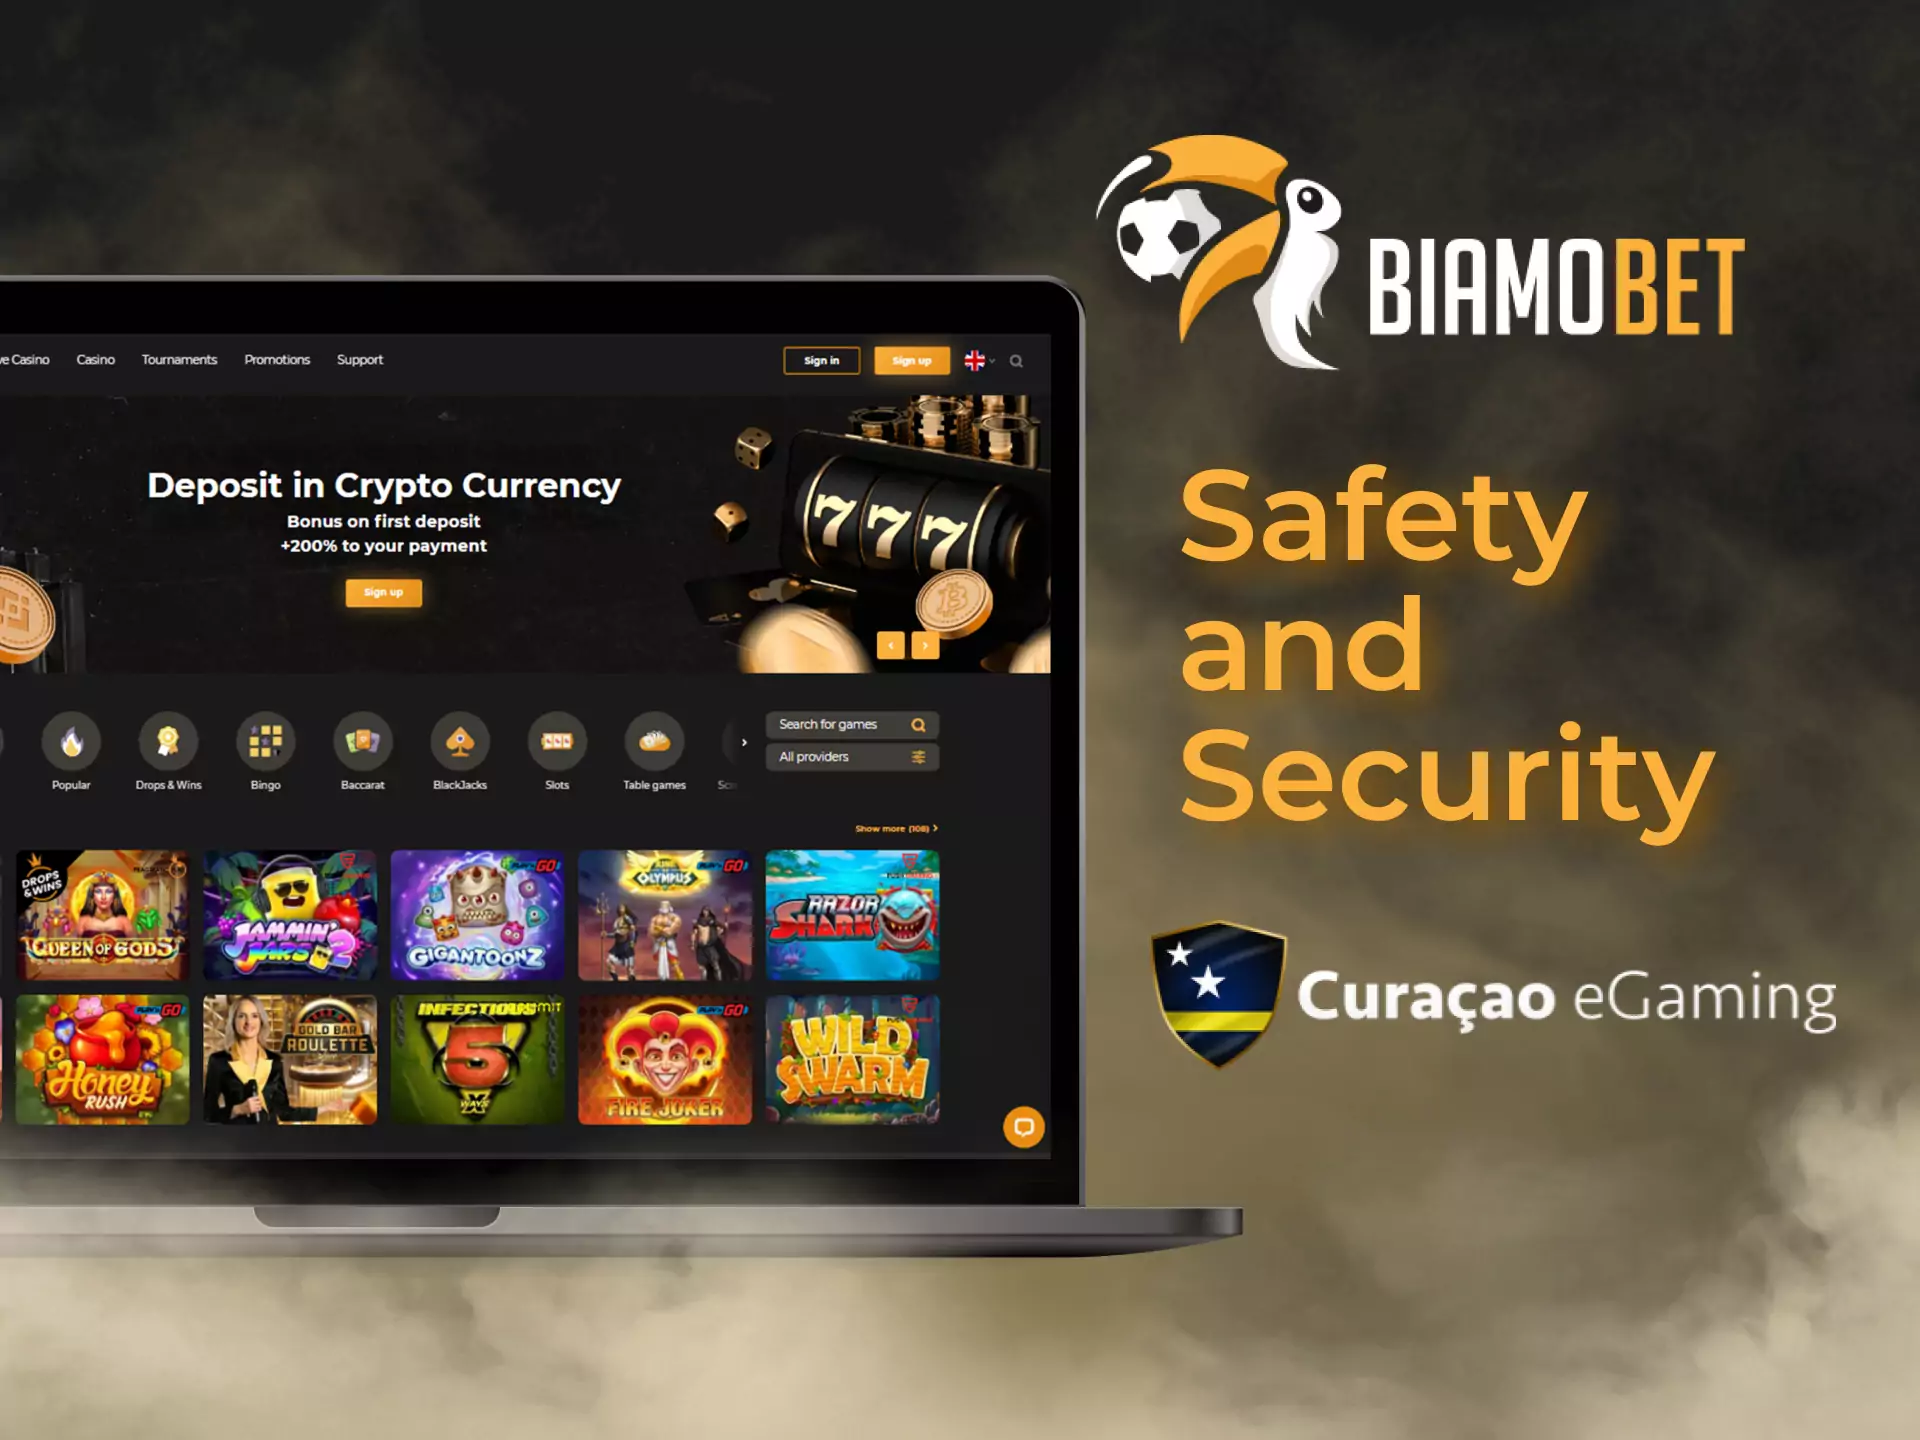 The Biamobet is a safe and secure online bookmaker confirmed by the Curacao Egaming.